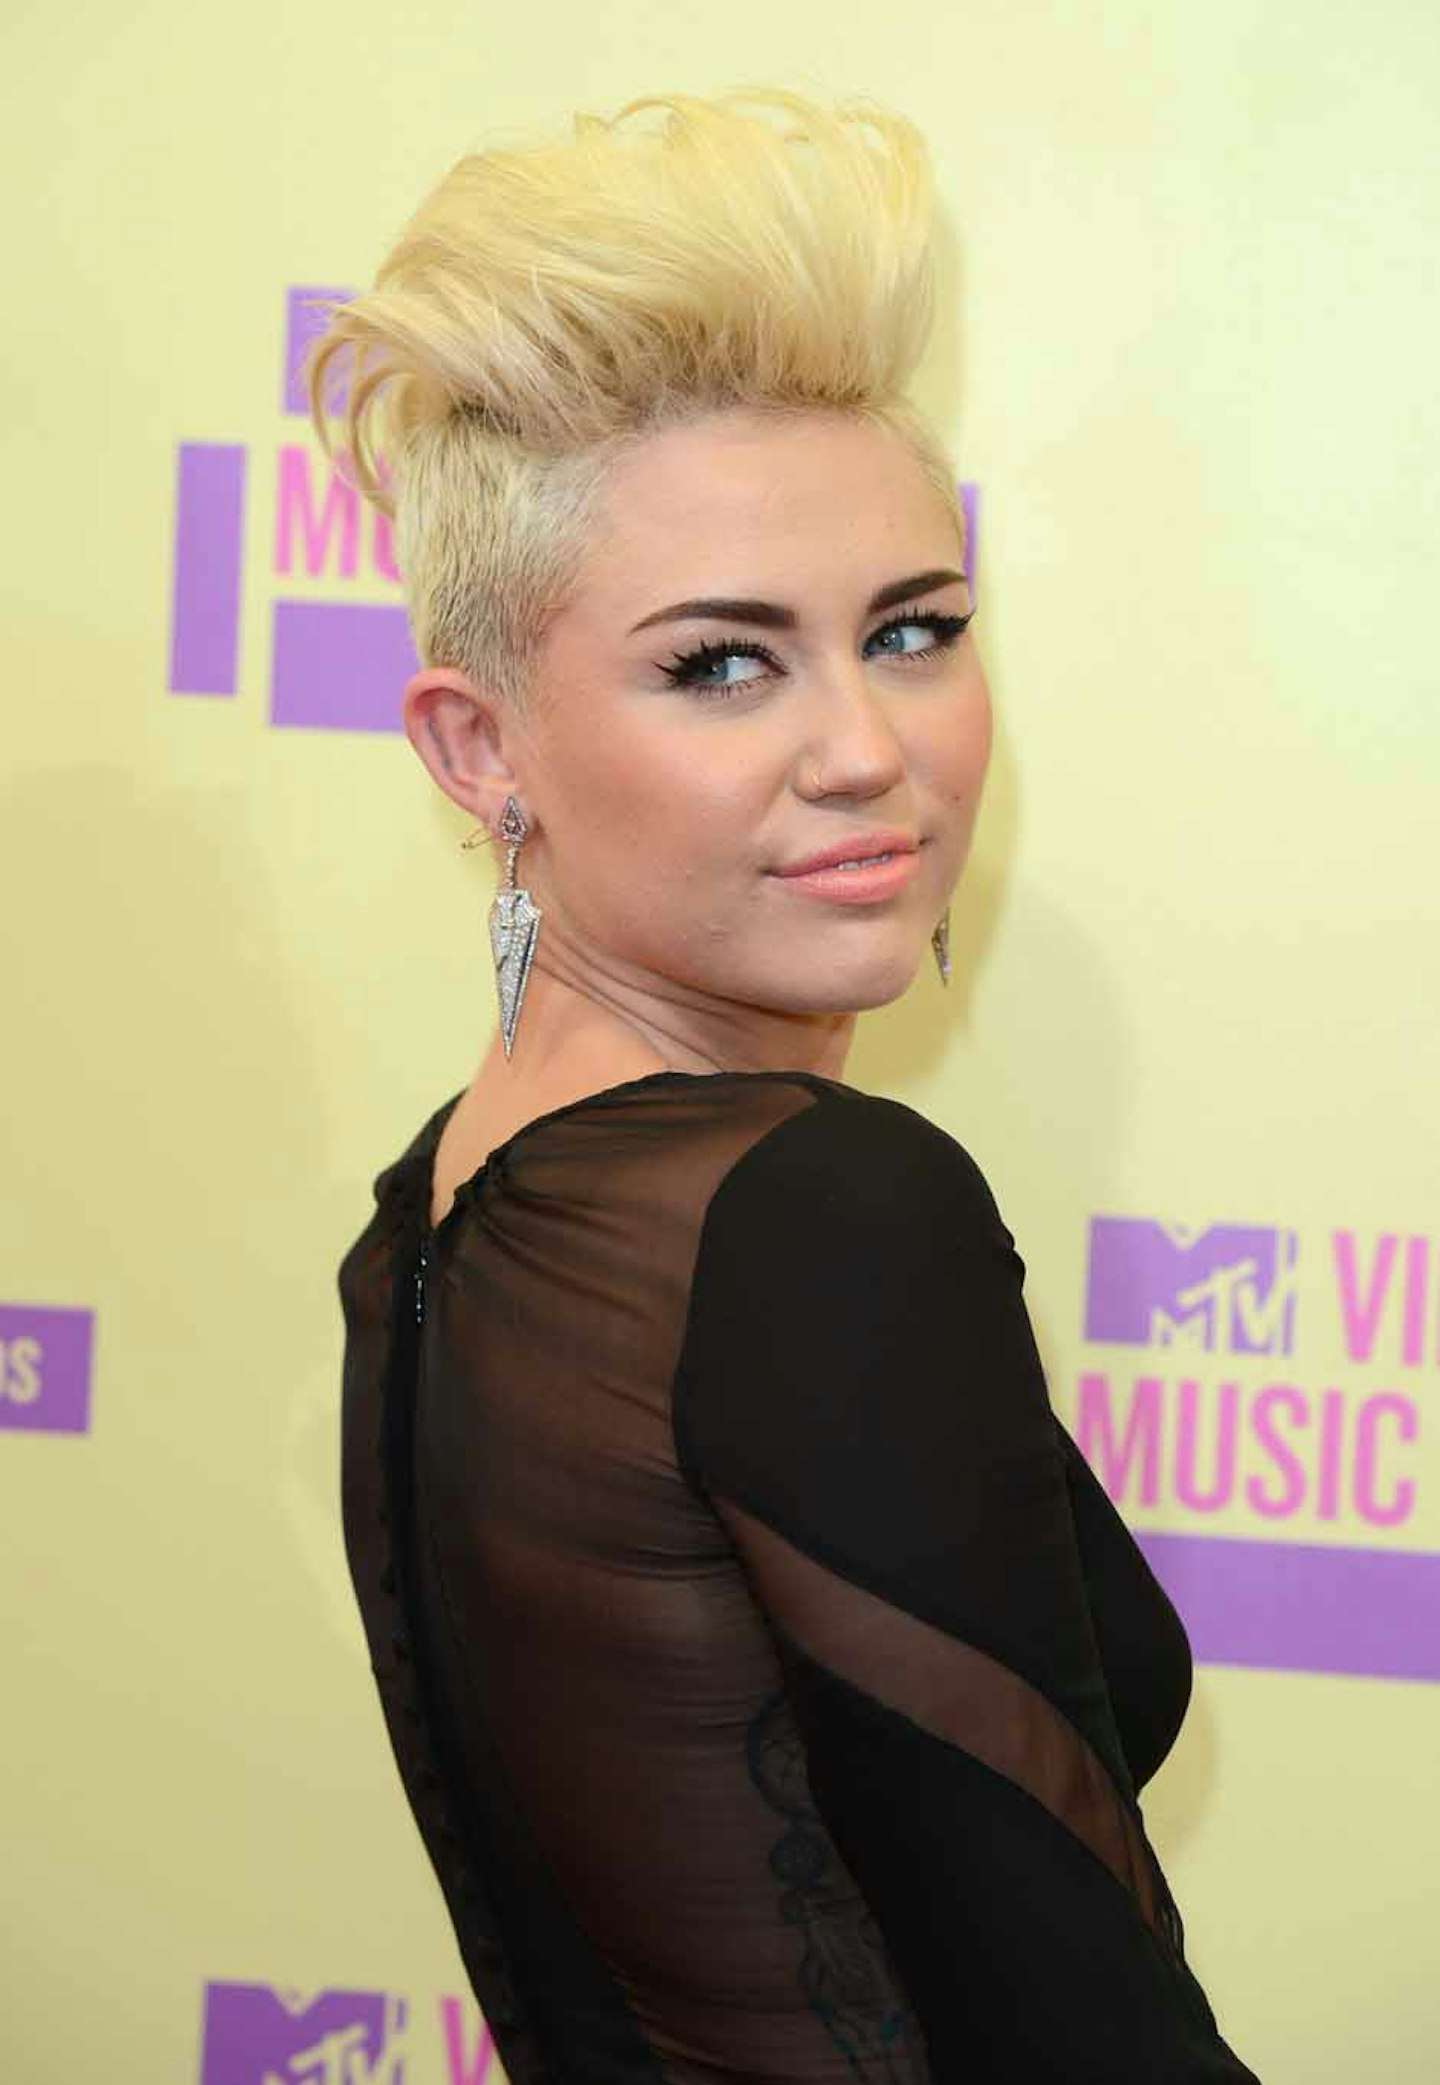 Miley arriving at the MTV Video Music Awards (2012)